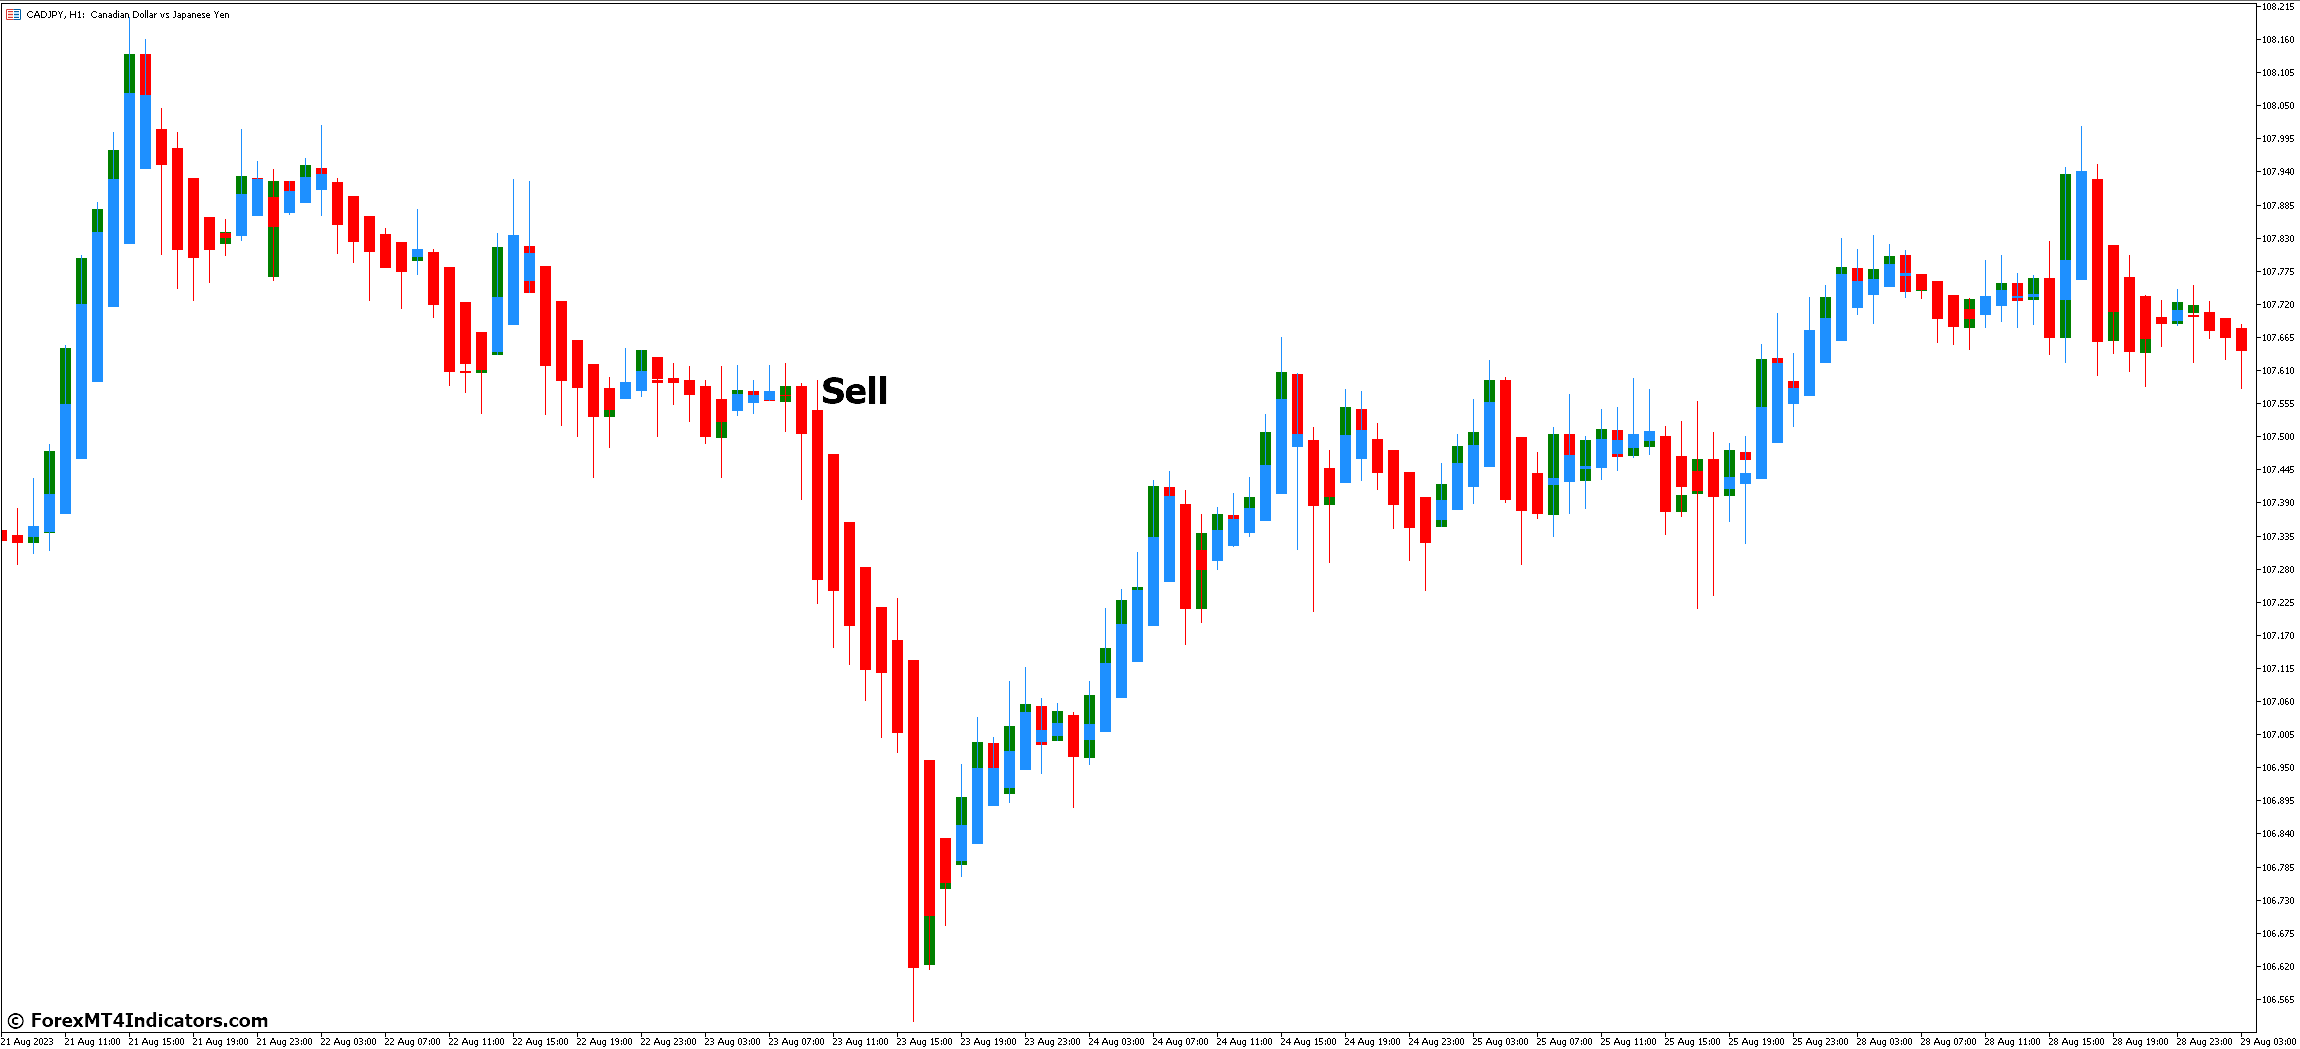 How to Trade with Heiken Ashi MT5 Indicator - Sell Entry